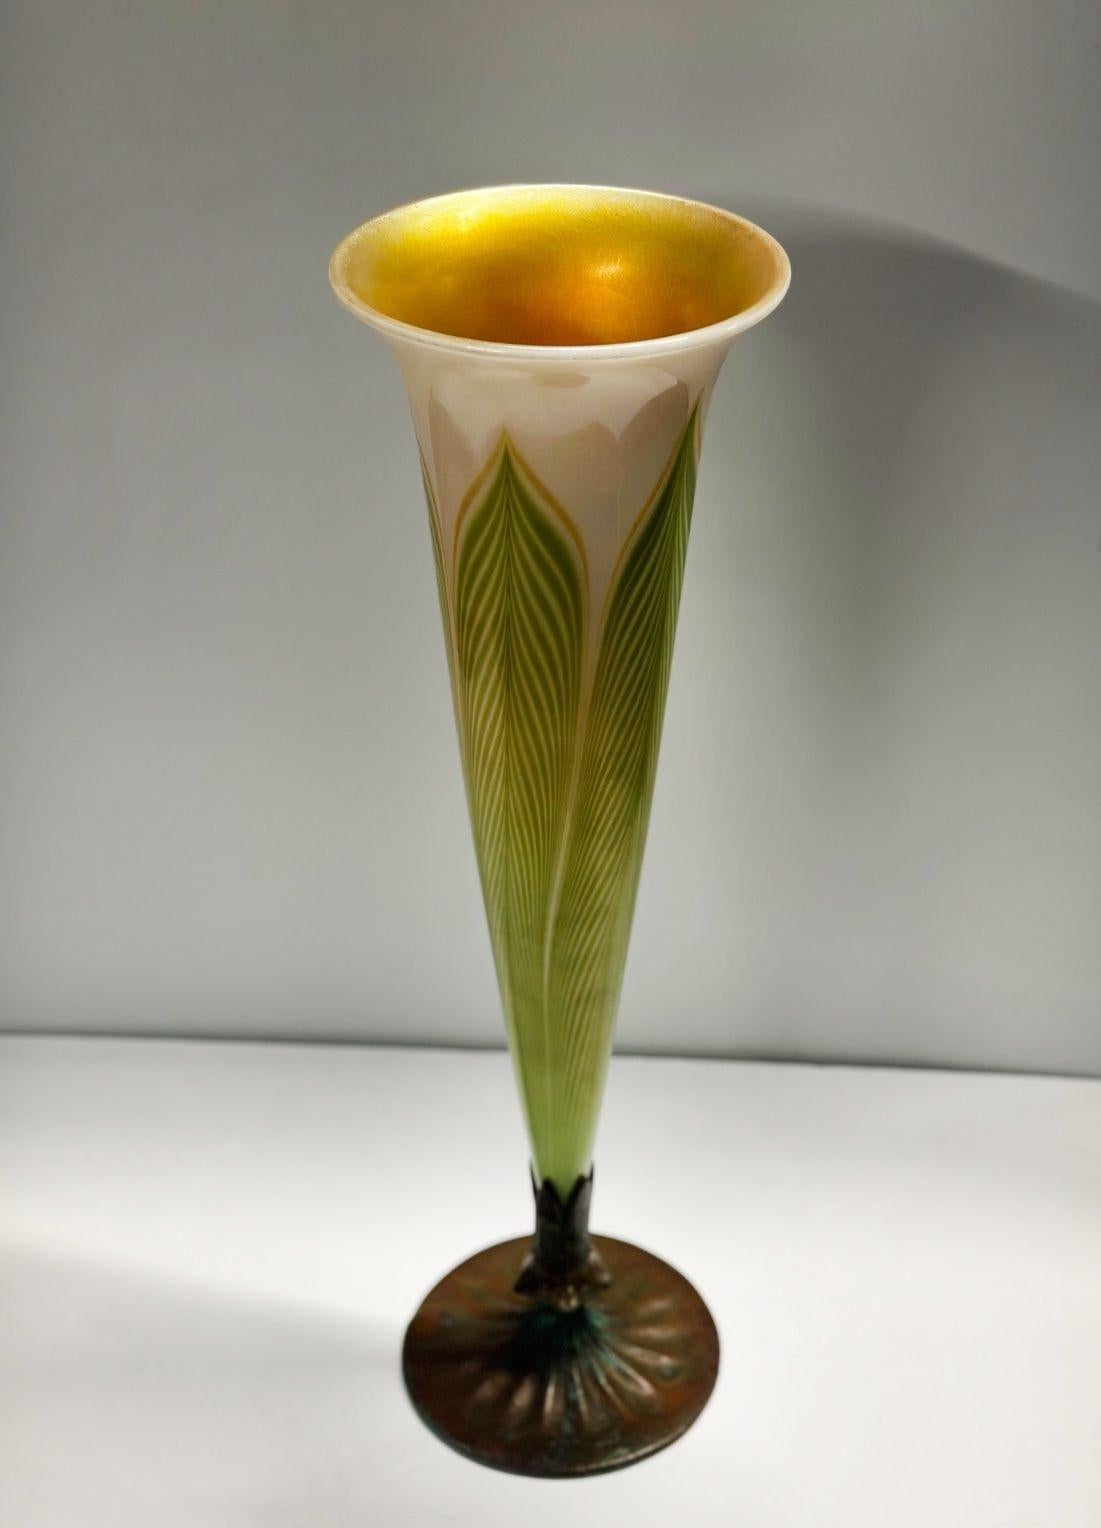 L.C. Tiffany Studios iridescent vase standing on an inserted bronze base (non-removable). The delicate yet vibrant interplay of colors, featuring shades of green, yellow, and white, blend perfectly and makes this piece stand out by its unique